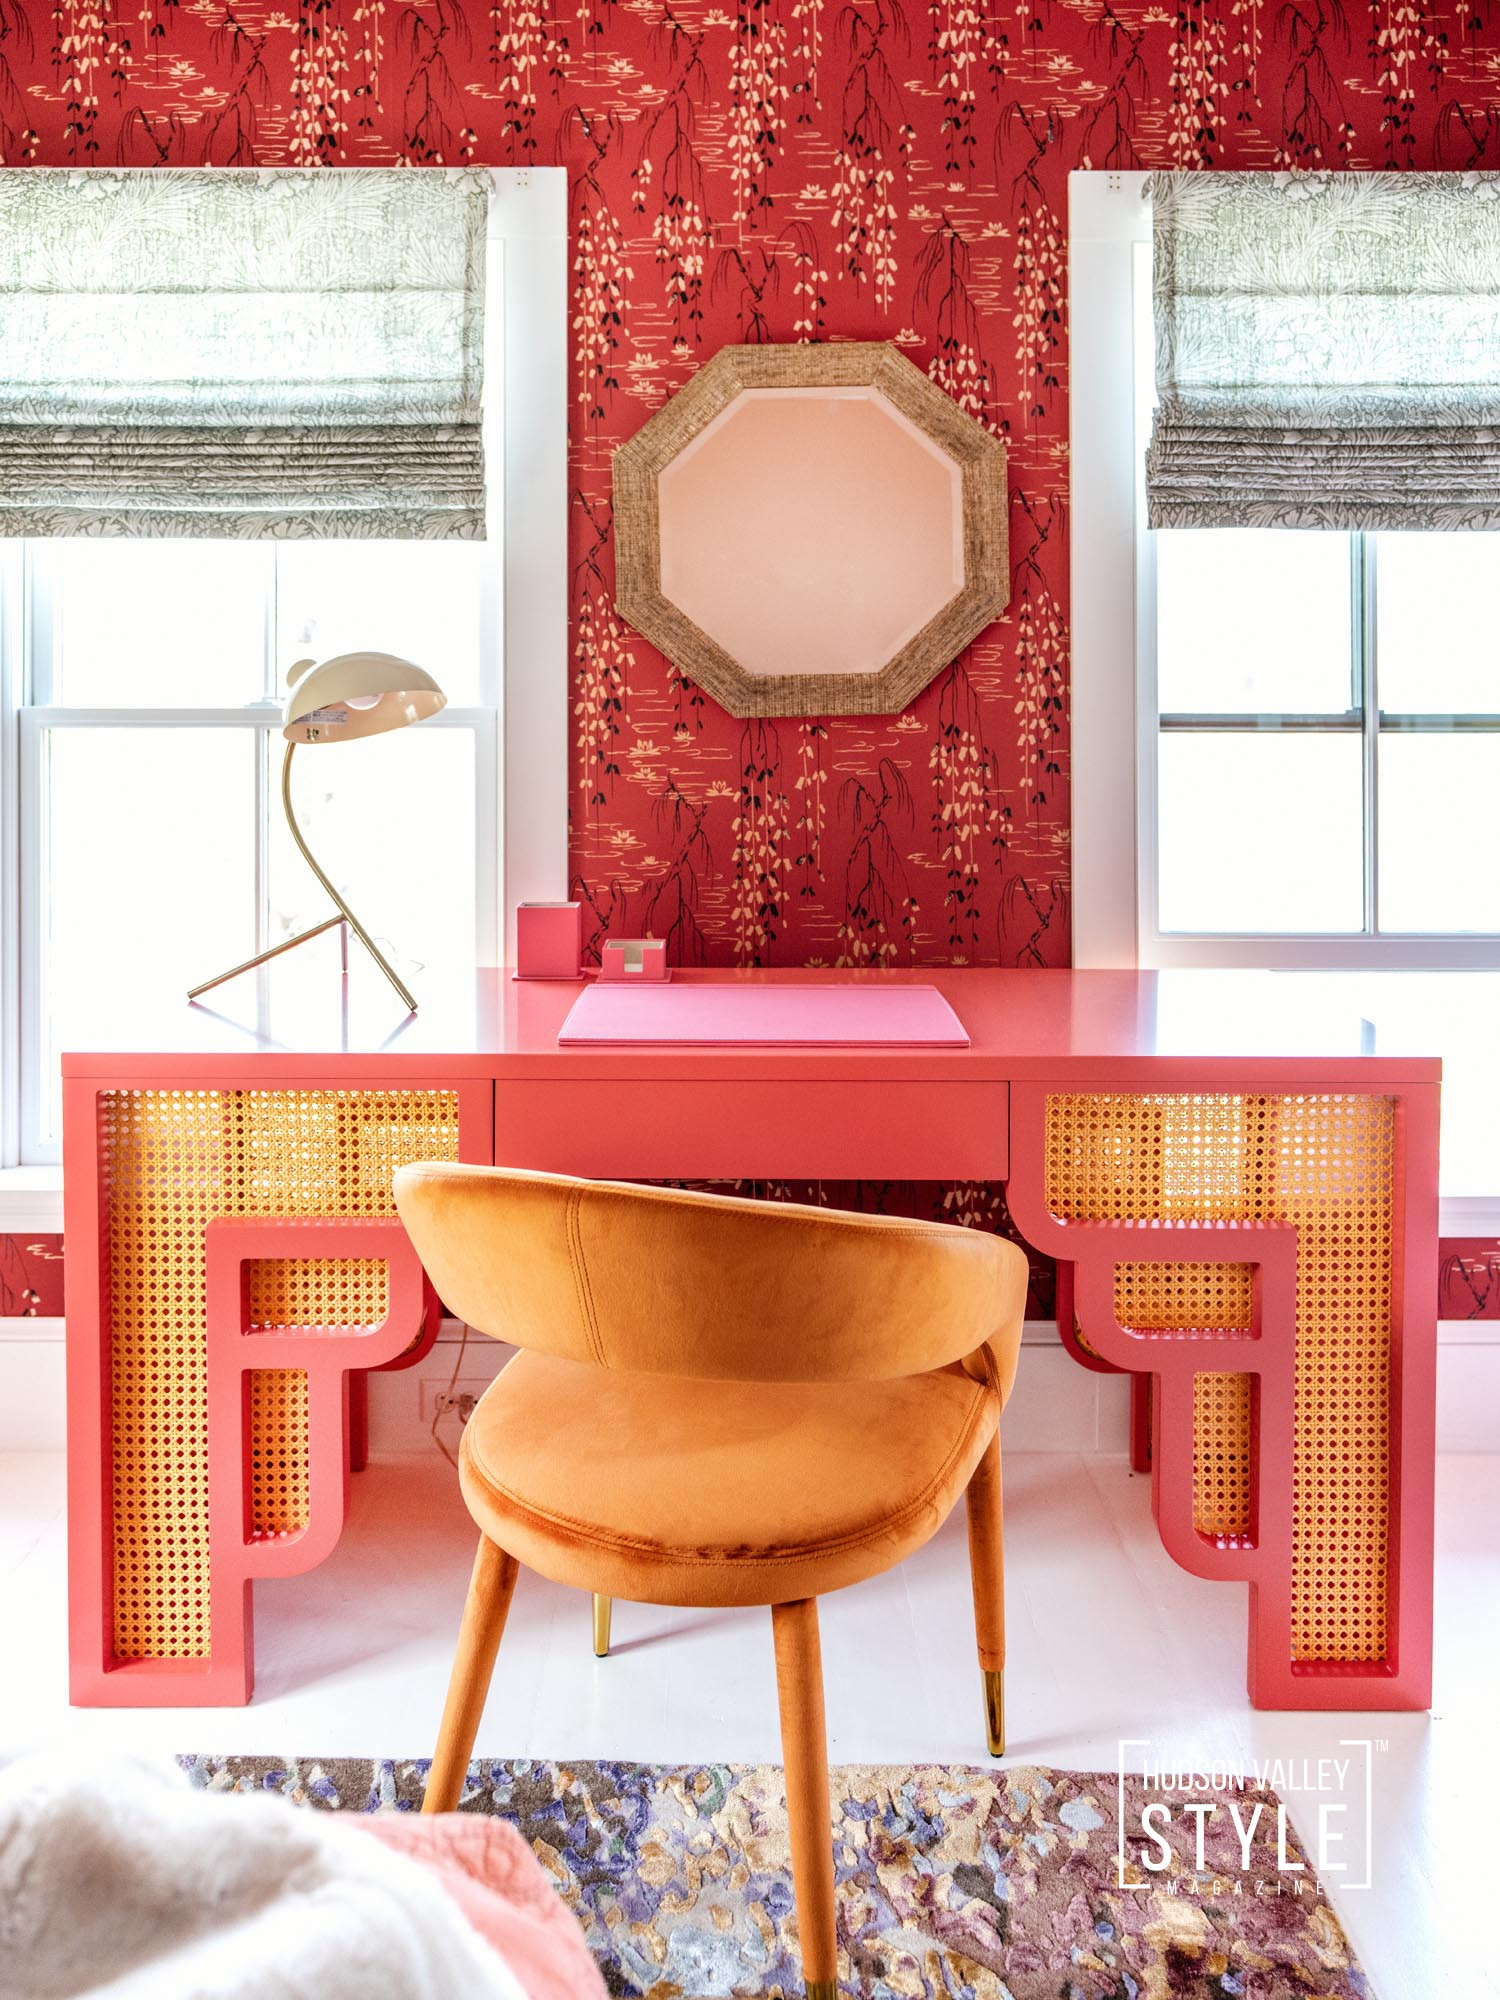 Maximalism: The Bold New Interior Design Trend Taking Over Homes Everywhere – Interior Design Trends with Designer/Photographer Maxwell Alexander, MA, BFA, EIC, Hudson Valley Style Magazine – Photography ©2023 Alluvion Media